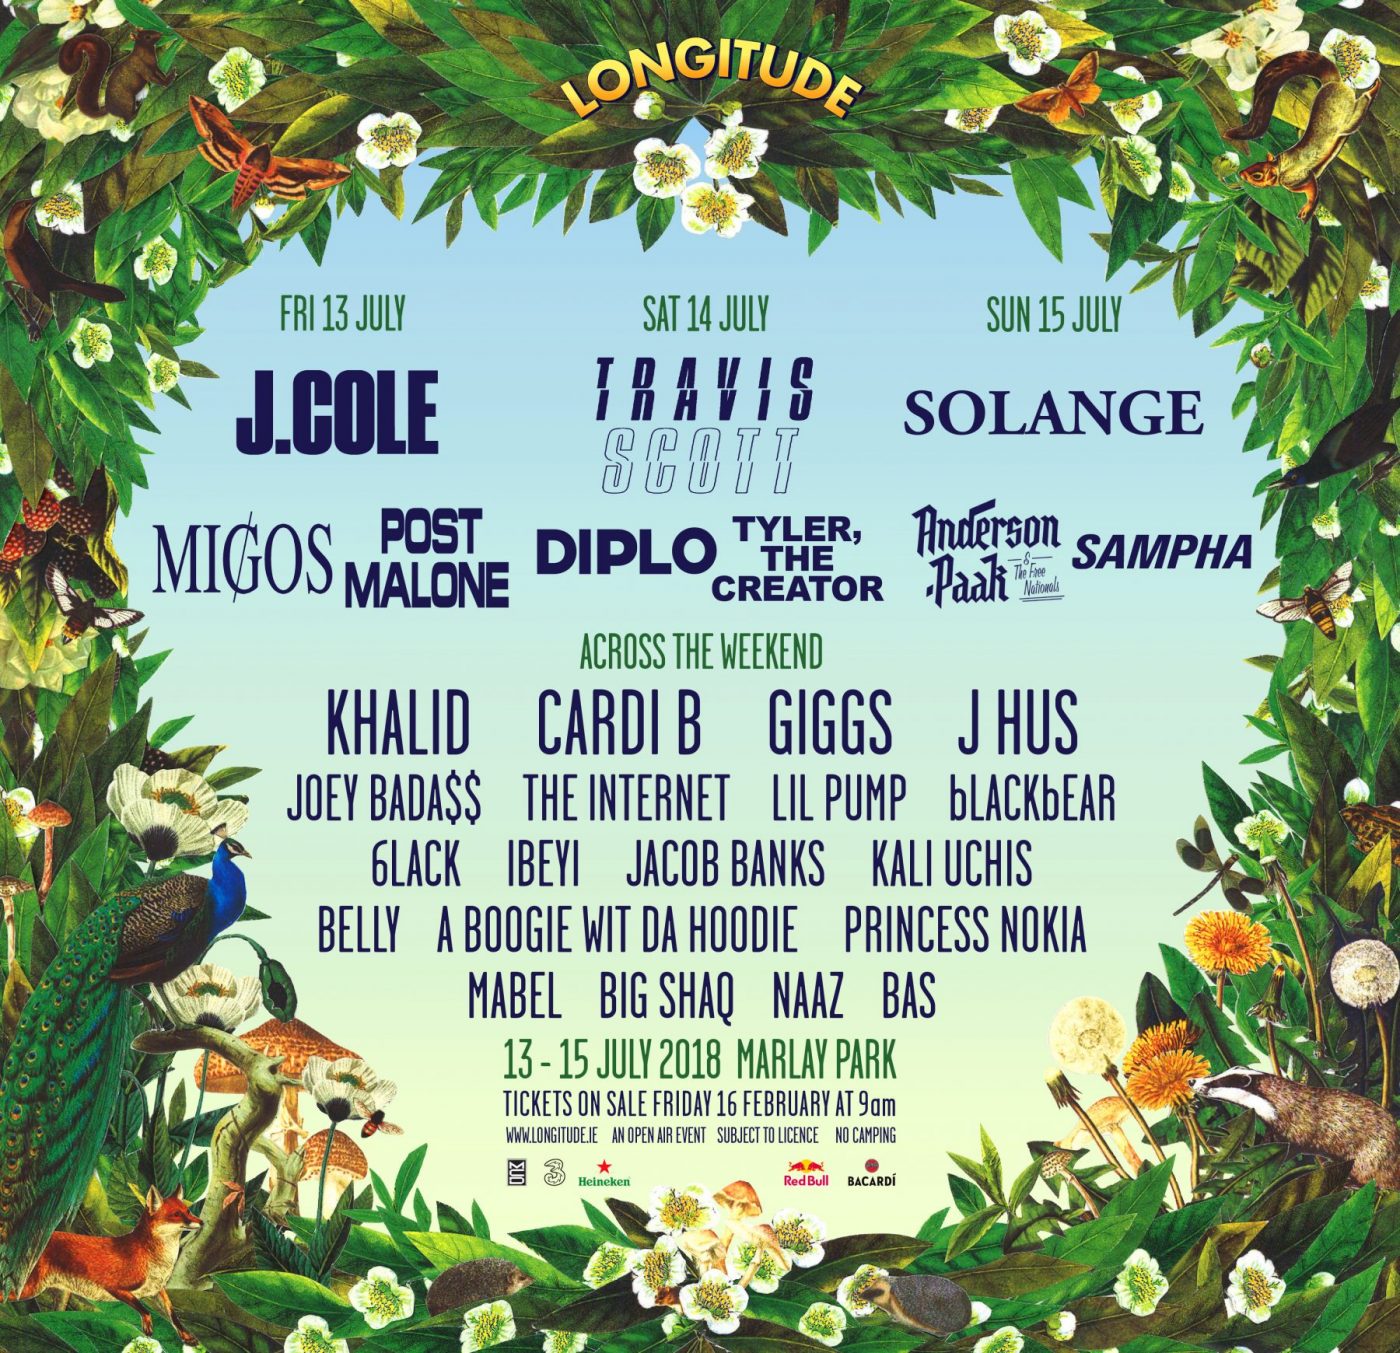 Longitude goes Hip-Hop heavy with 2018 line-up | News